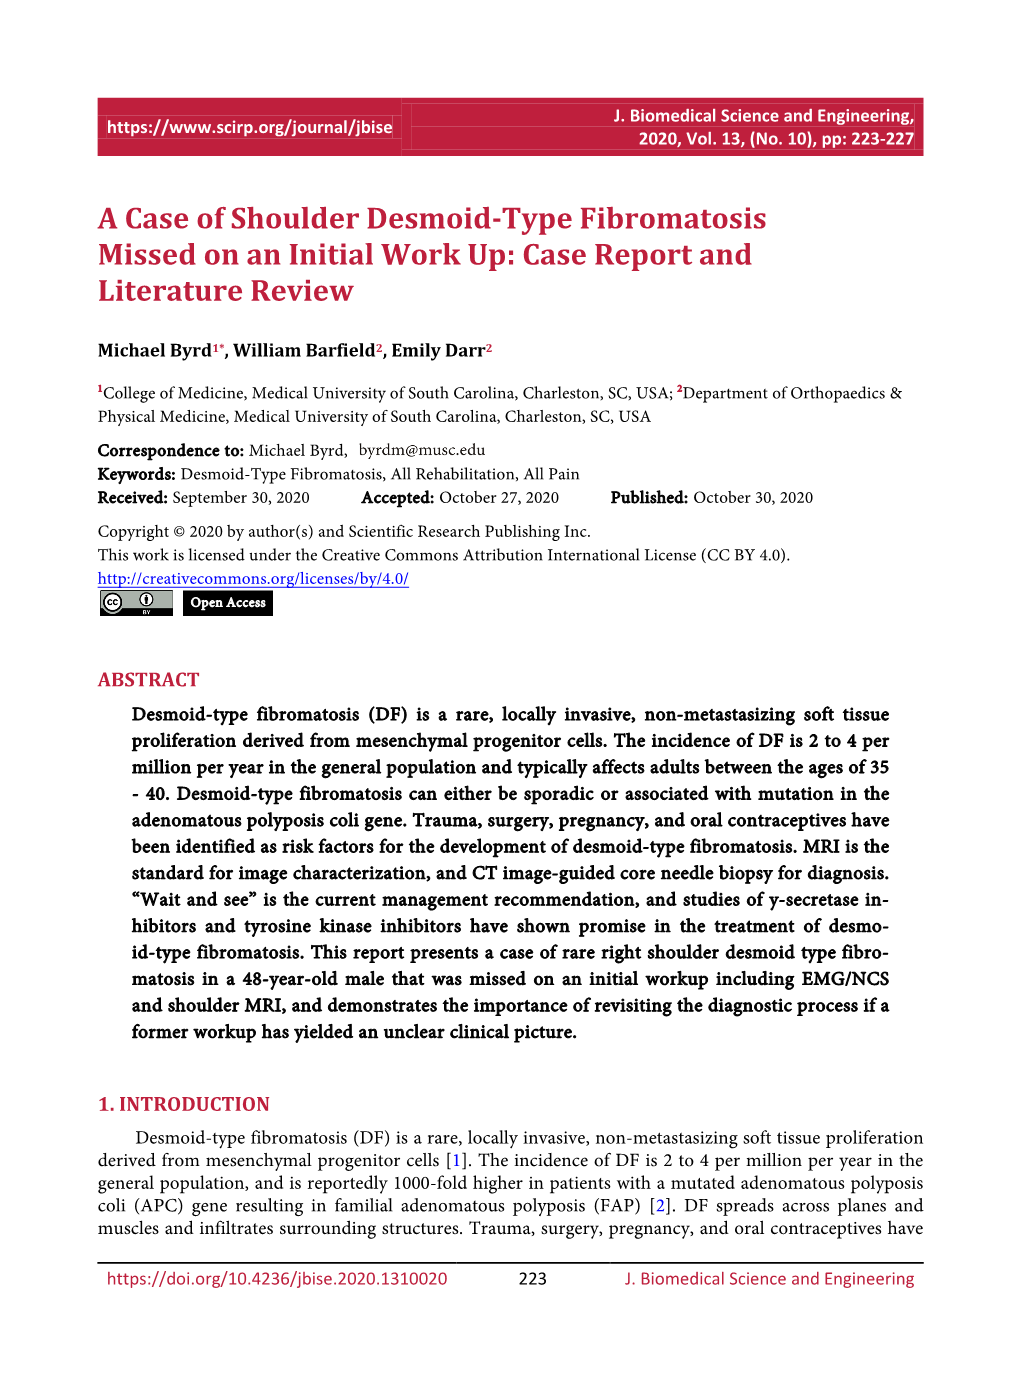 A Case of Shoulder Desmoid-Type Fibromatosis Missed on an Initial Work Up: Case Report and Literature Review